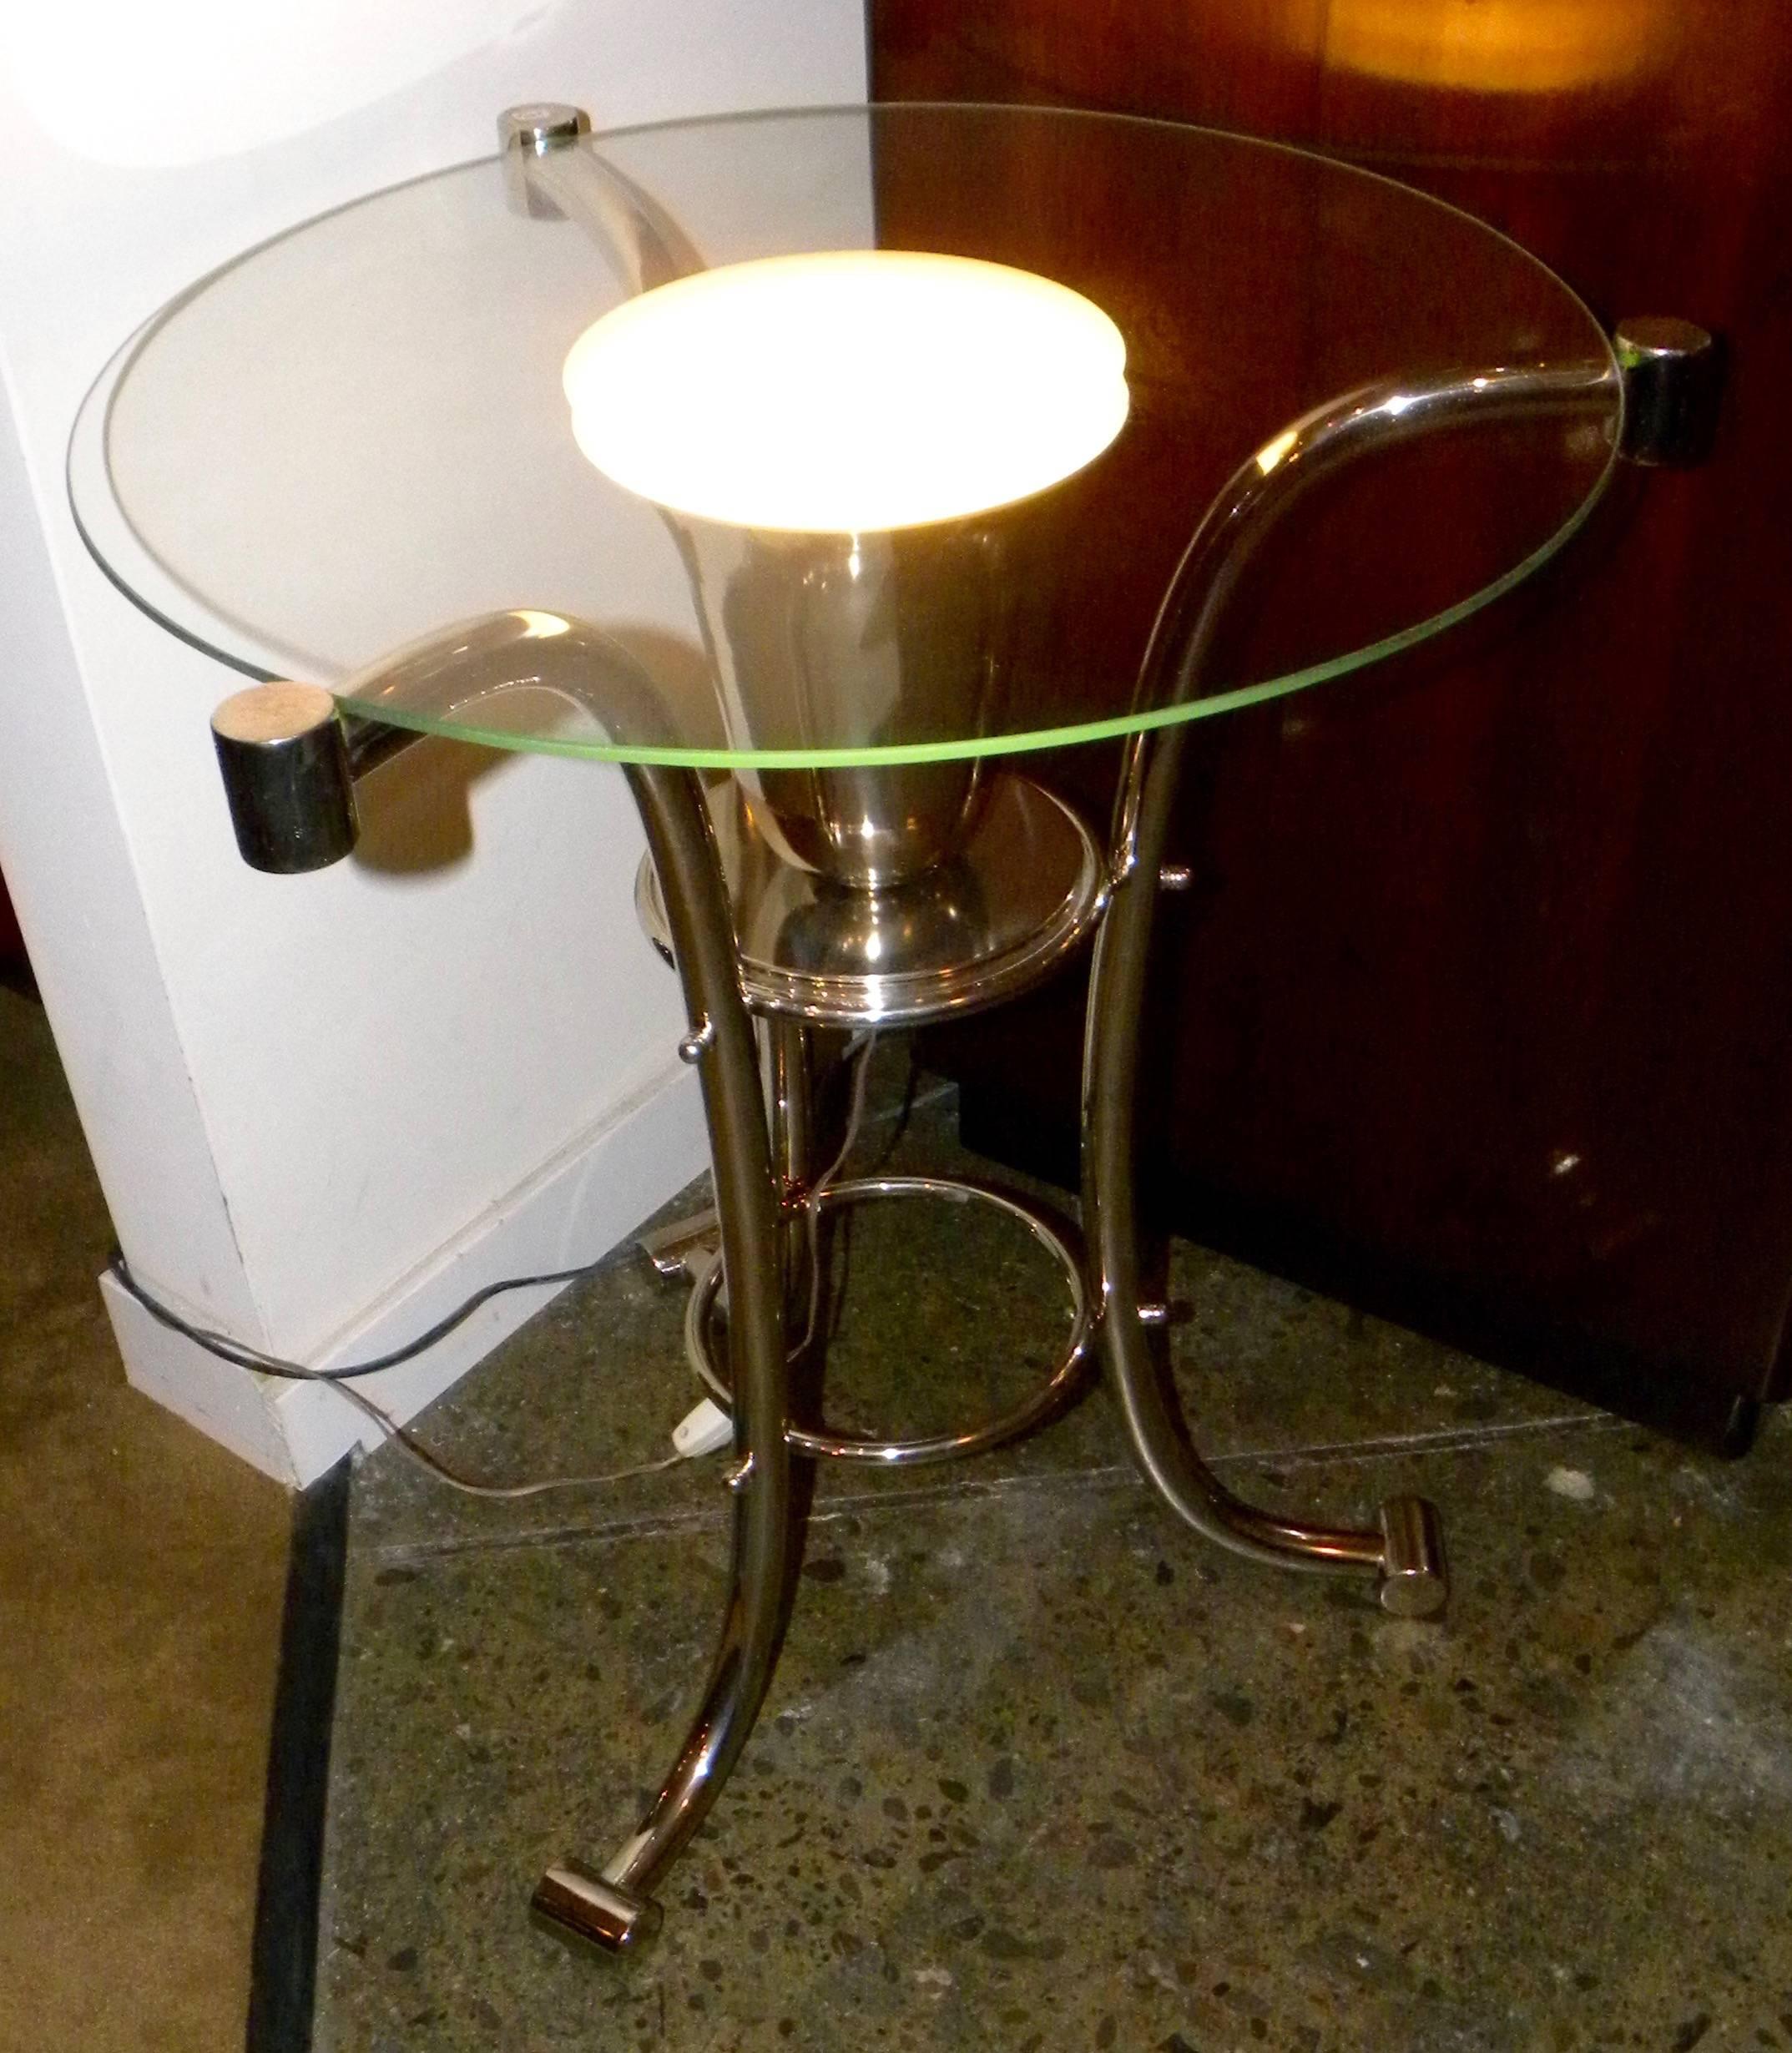 Unusual clear glass top round table with uplight. Nice metal frame with very Art Deco style. Would look great also in clean Mid-Century room. Frosted center circle which echoes the intensity of the uplight makes for a nice ambient light treatment.